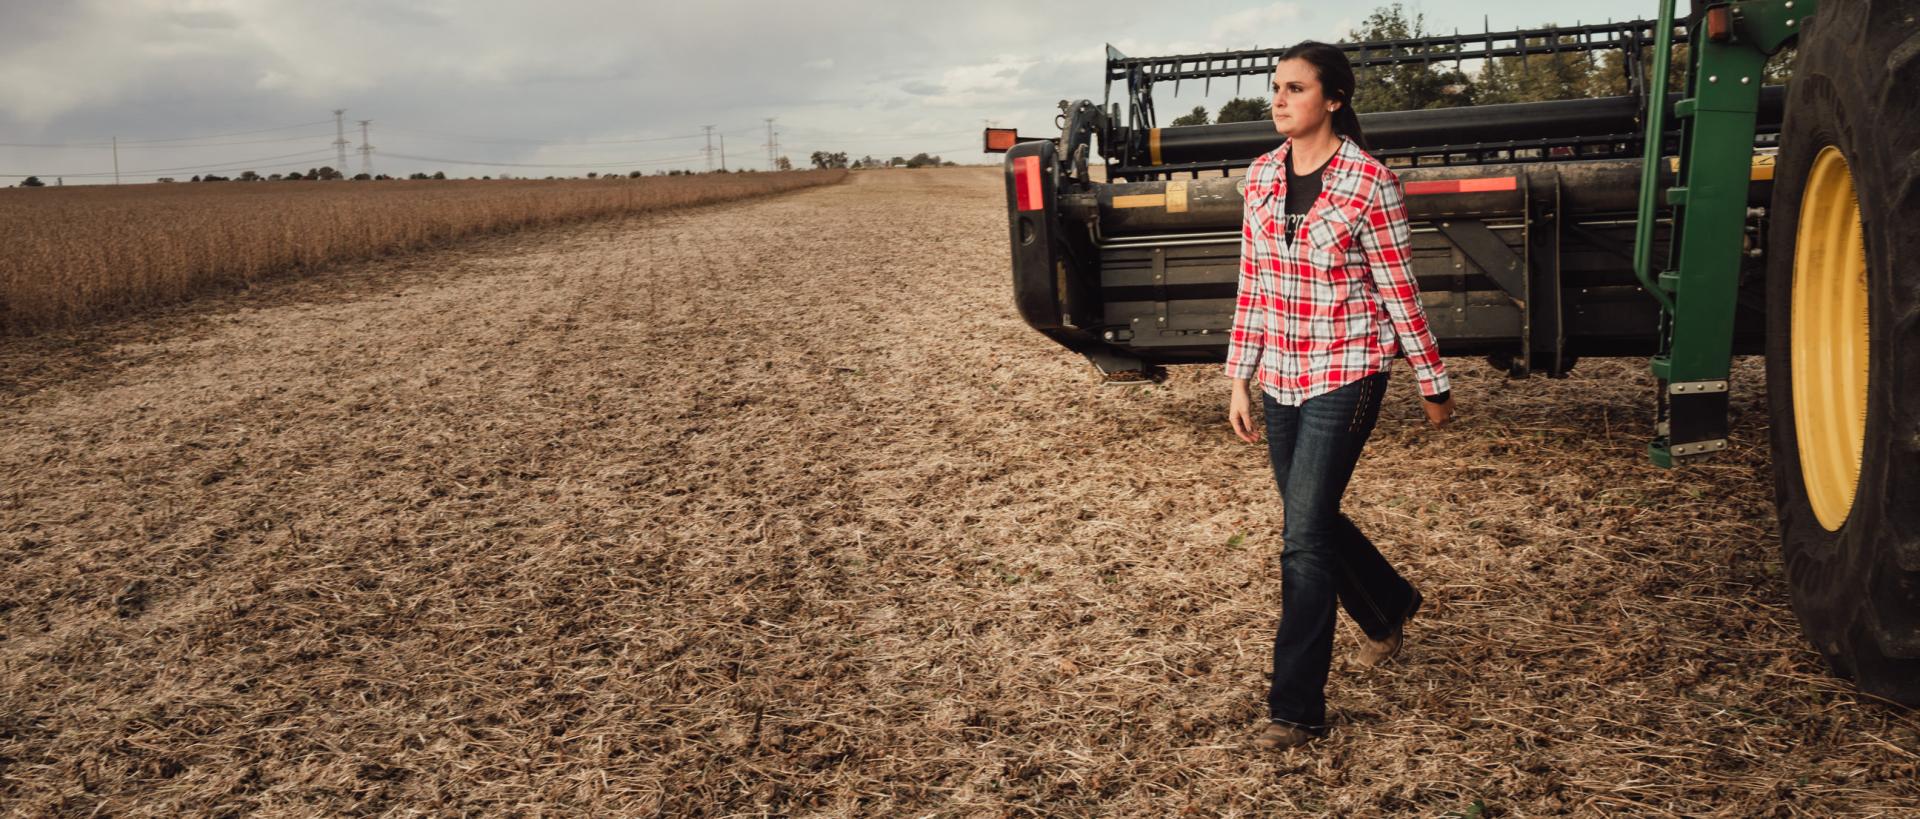 Woman walking out of combine in harvested field.